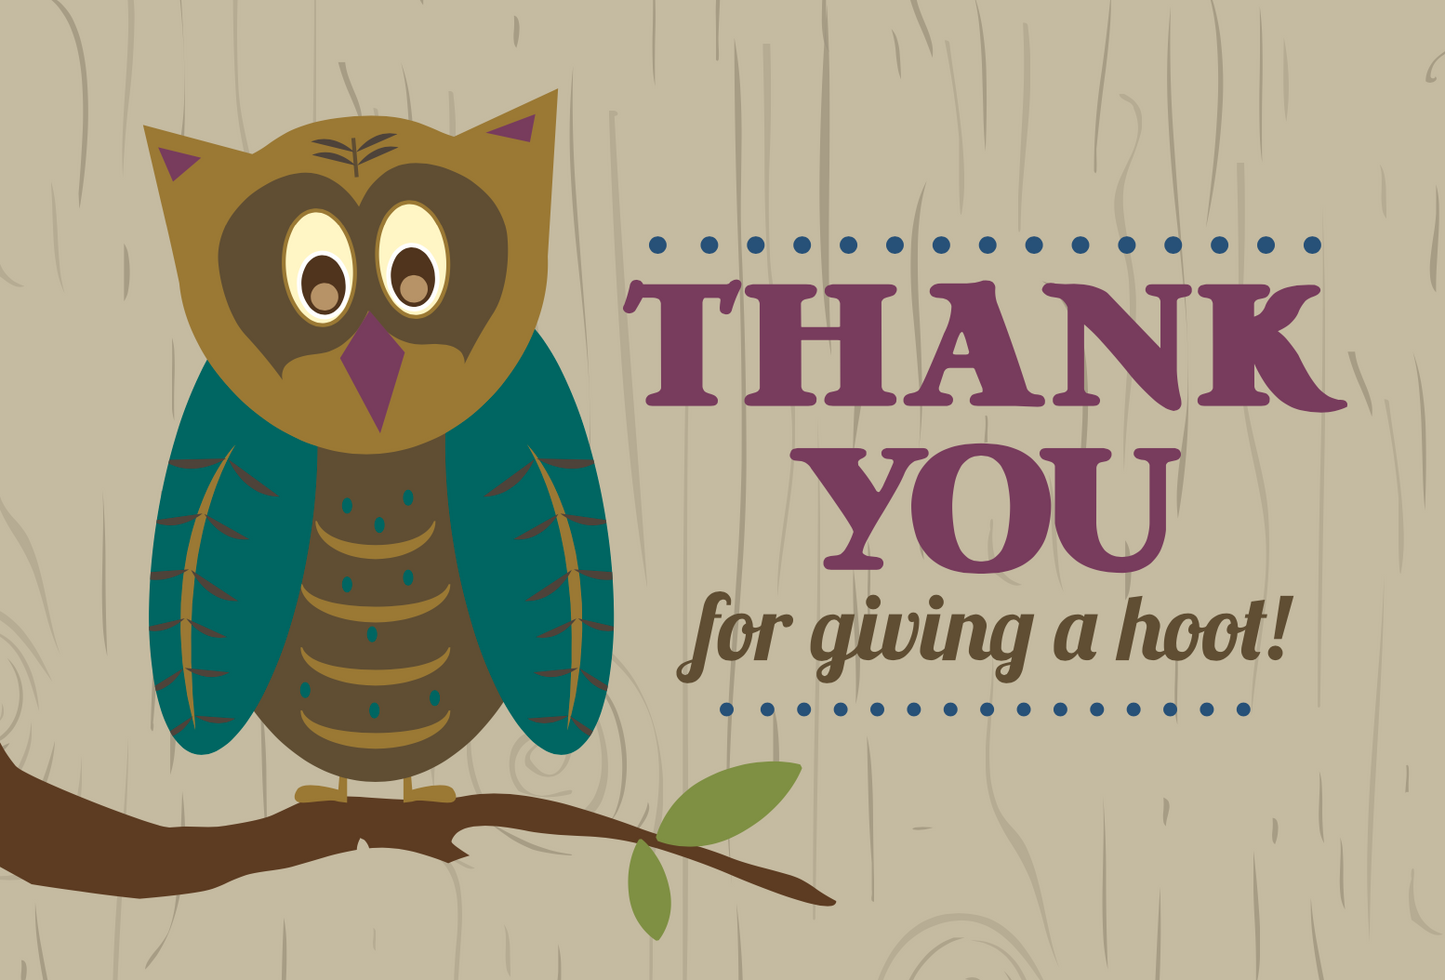 Thank You for Giving a Hoot! - Owl mini greeting card